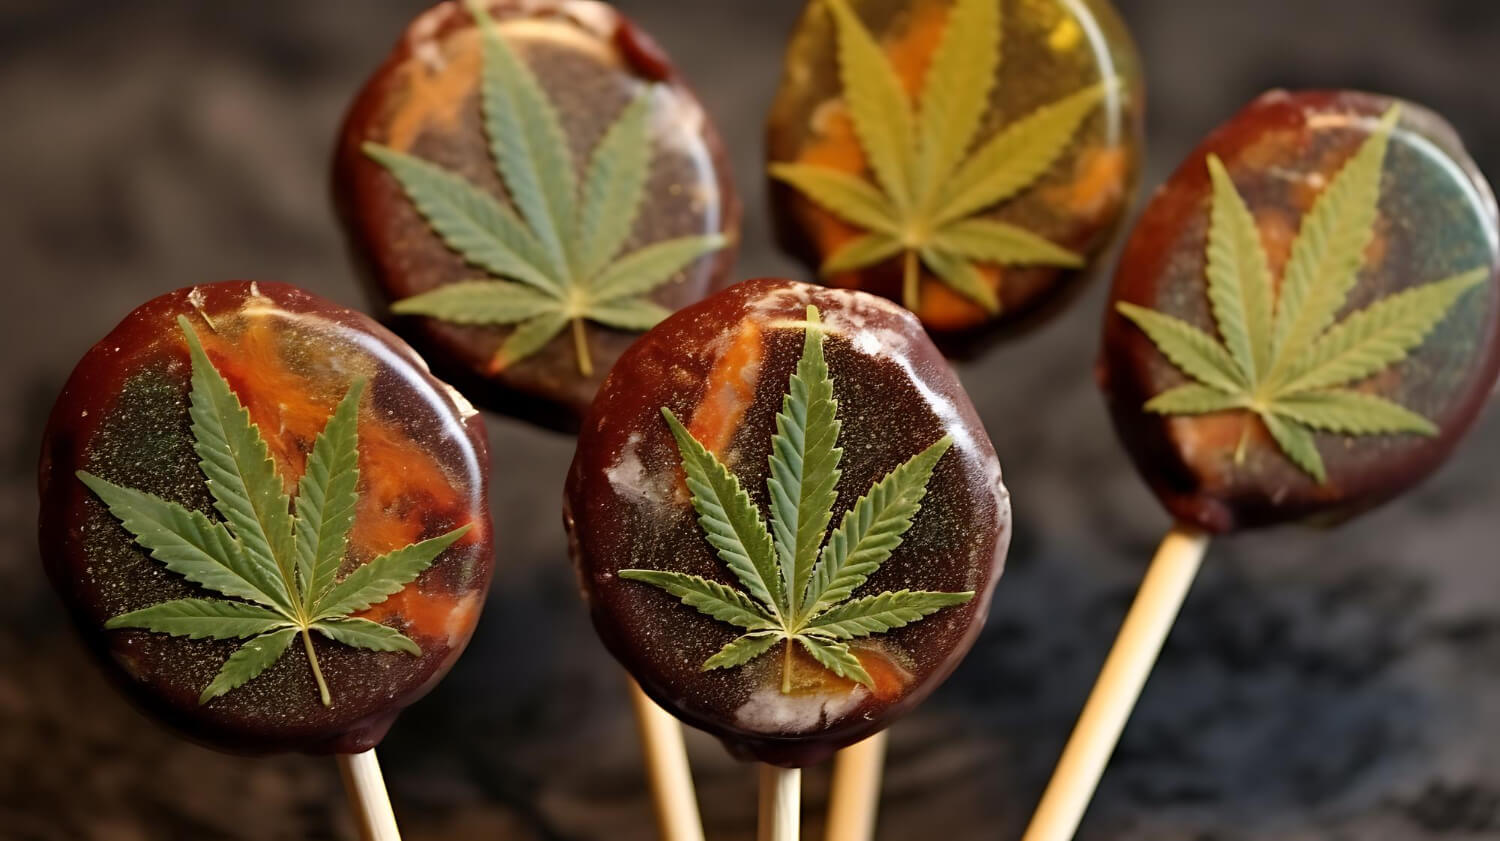 Cannabis candy ends up on trick or treaters' bags